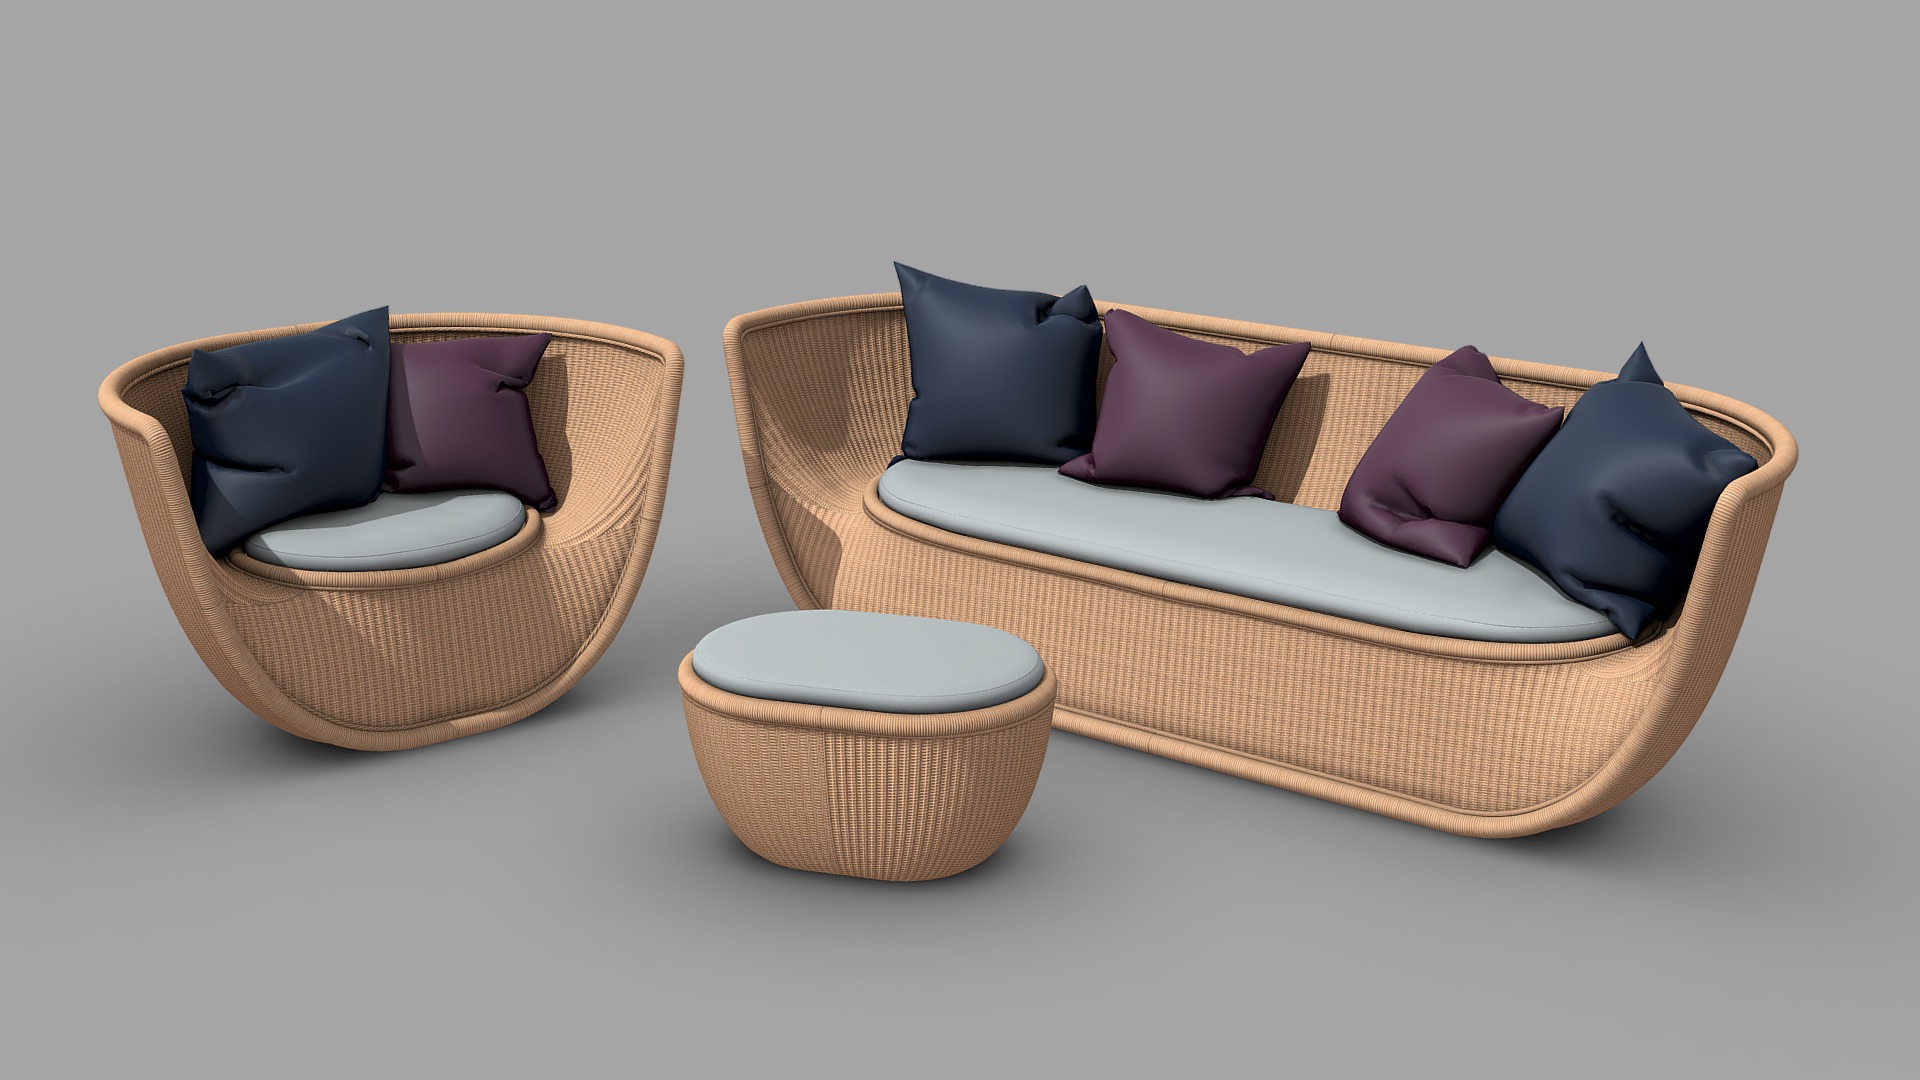 3D model Yamakawa Rattan Living Room Set - This is a 3D model of the Yamakawa Rattan Living Room Set. The 3D model is about a wicker basket with pillows.